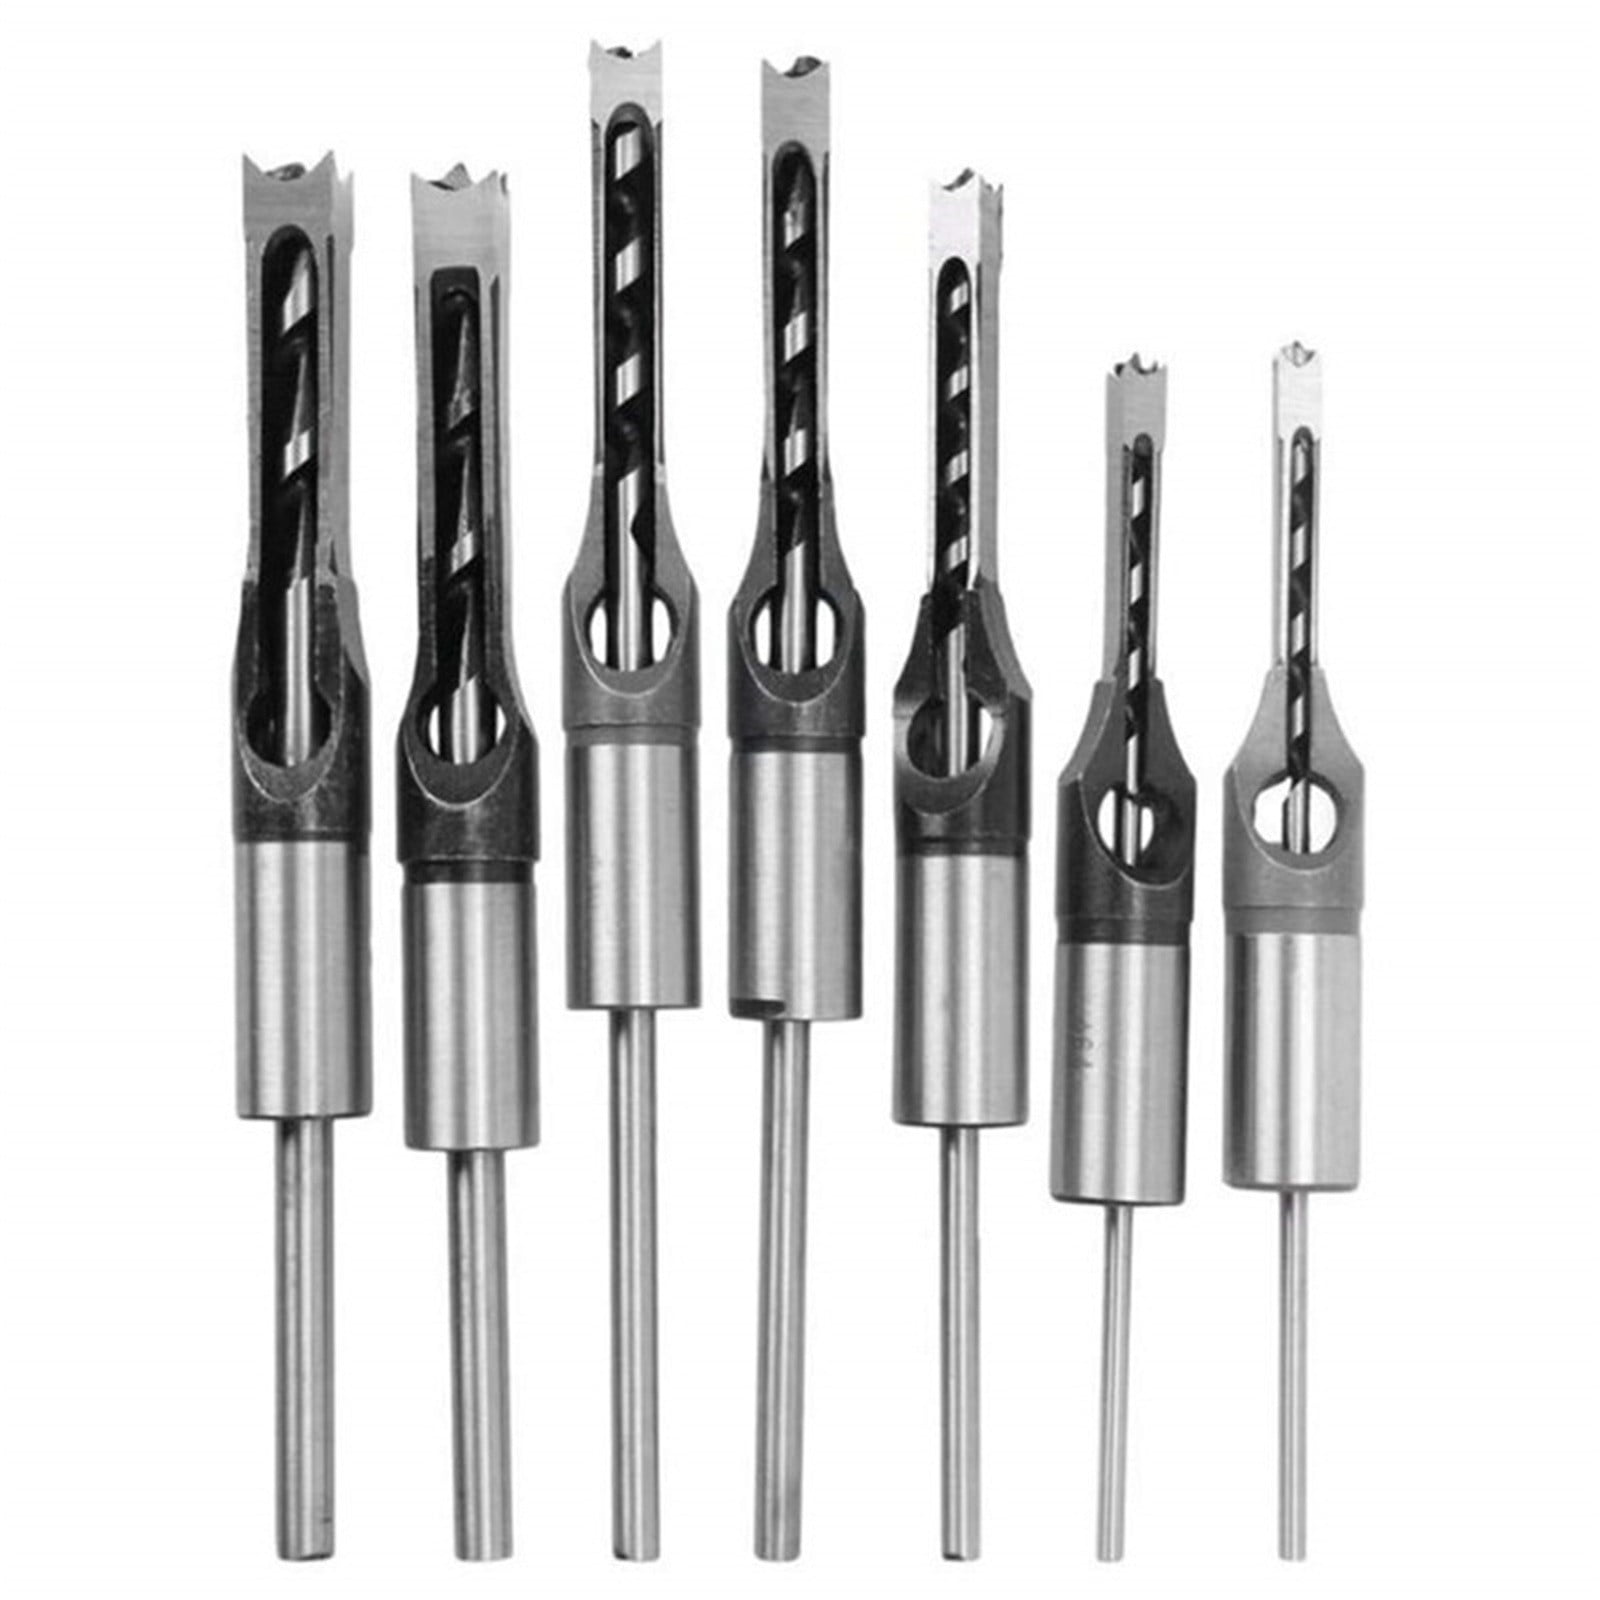 4 Set Mortise  Square Hole Drill Bit Wood Working Tool Hollow Slotted 